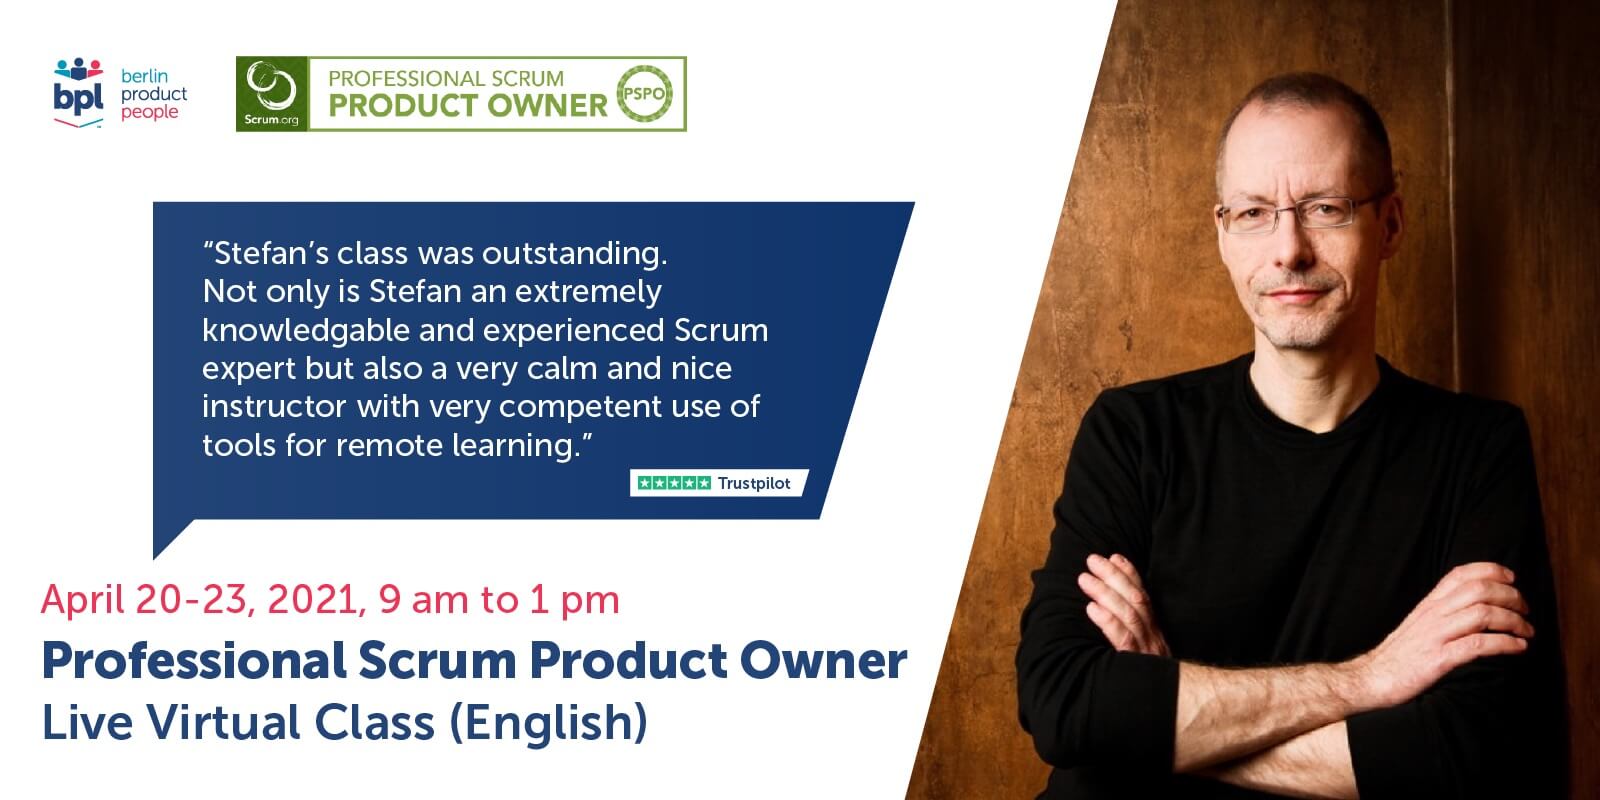 PSPO Professional Scrum Product Owner Online-Schulung in April 2021 — Berlin Product People GmbH